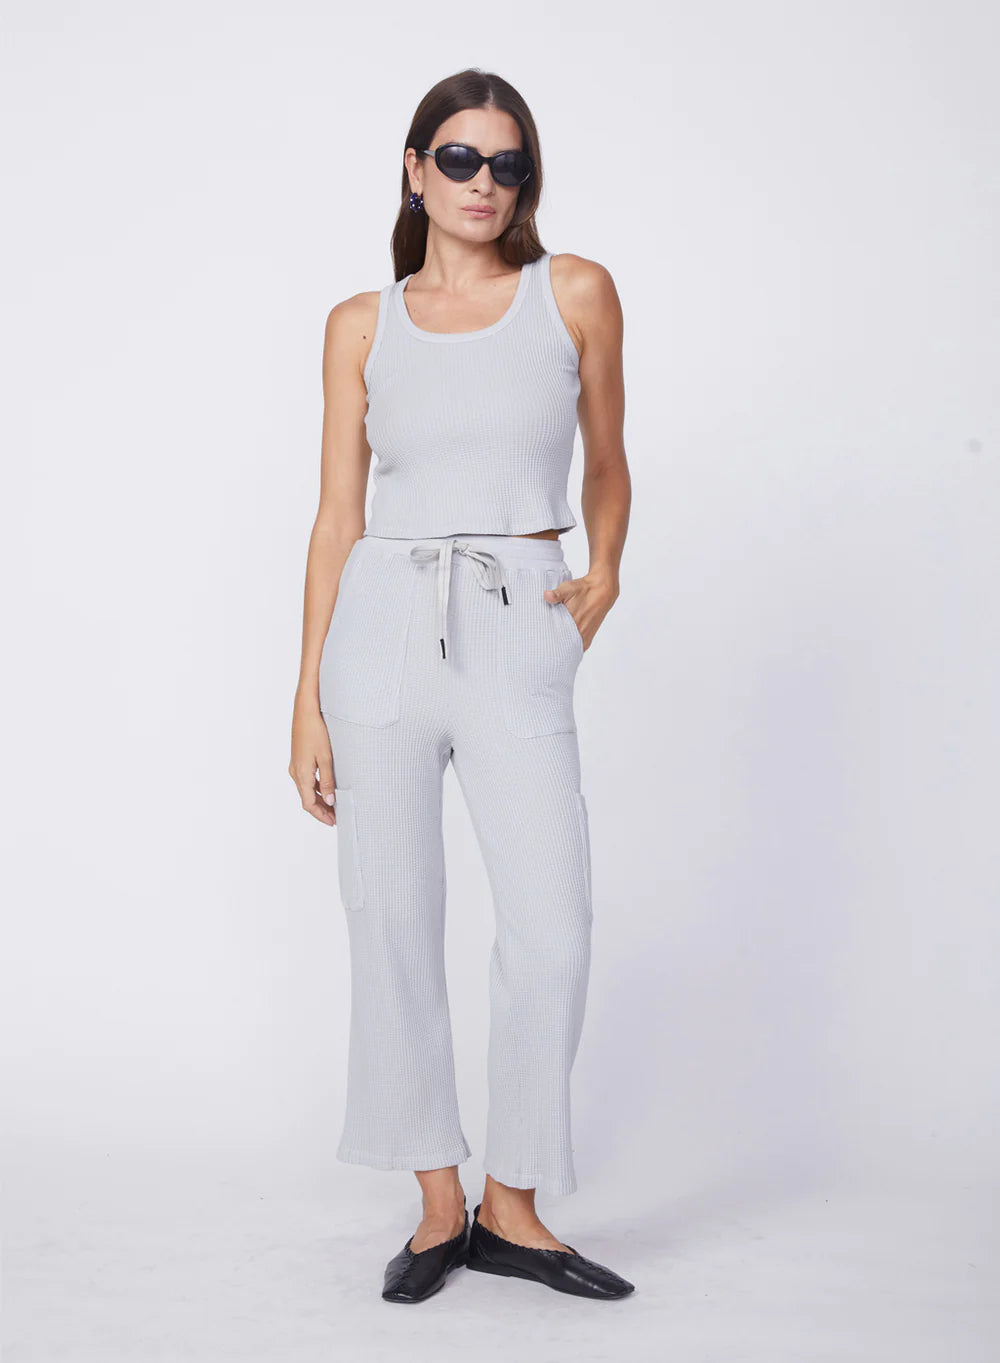 Mini Luxe Thermal Cropped Pant A24-566-5281 - Stateside